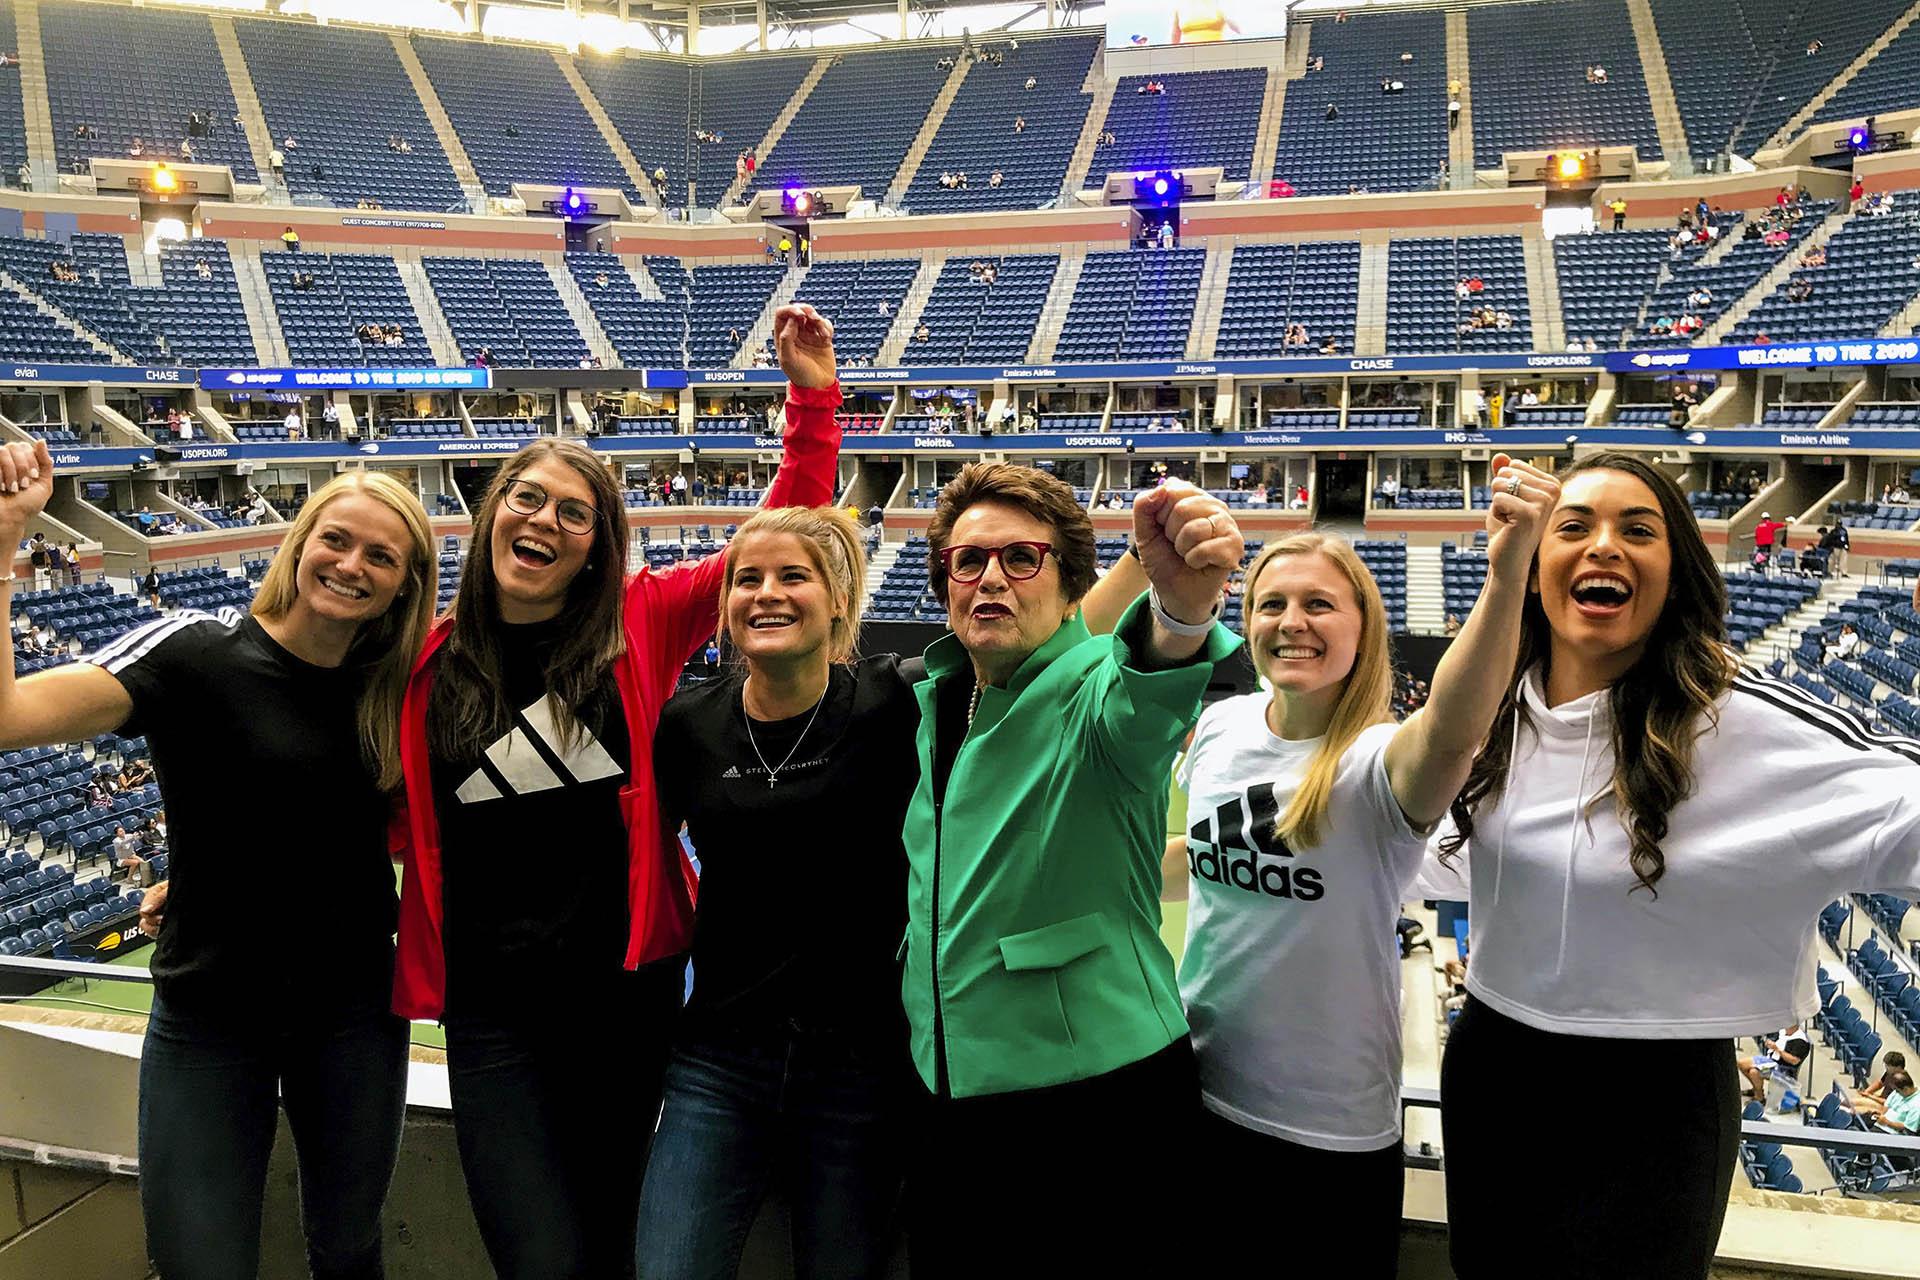 In this image provided by Adidas, Hall of Fame tennis player Billie Jean King, center, poses with hockey players, from left, Canadian Renata Fast, Canadian Rebecca Johnston, American Brianna Decker, King, American Kendall Coyne Schofield and Canadian Sarah Nurse at the U.S. Open tennis tournament in New York, Monday, Aug. 26, 2019 (Samantha Hughey / Adidas via AP)